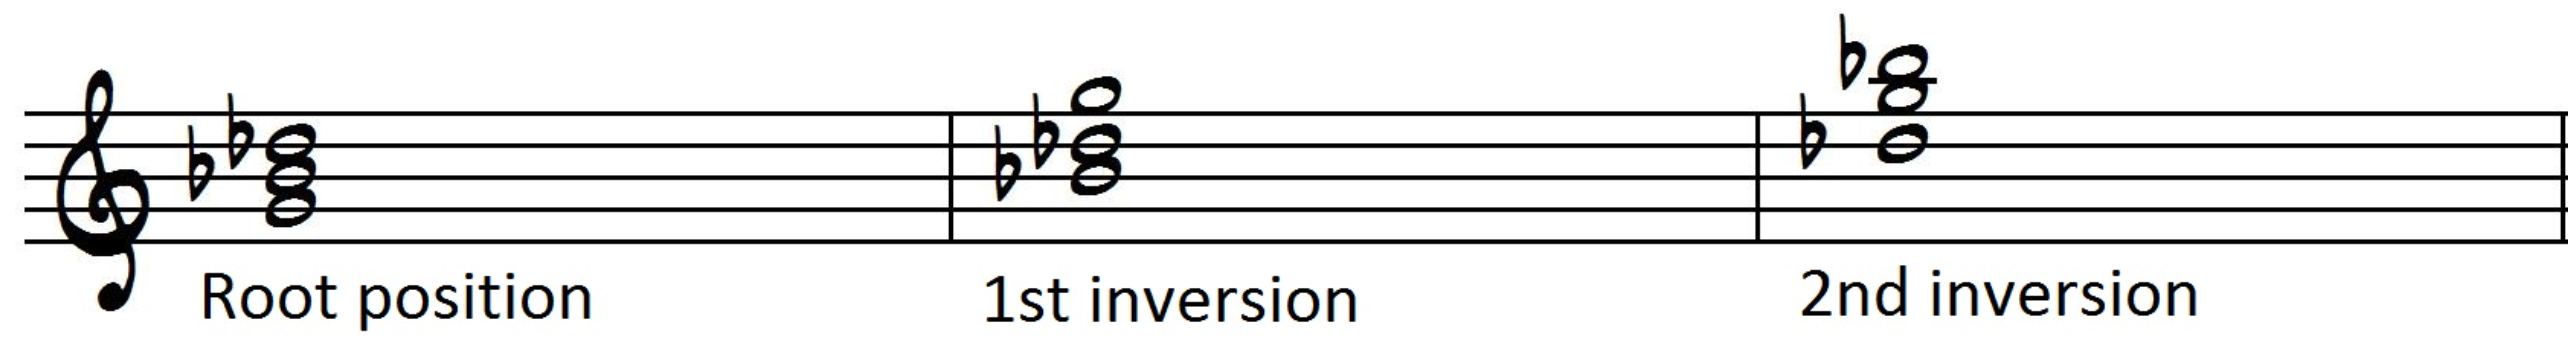 Root position, 1st inversion and 2nd inversion Gdim triad